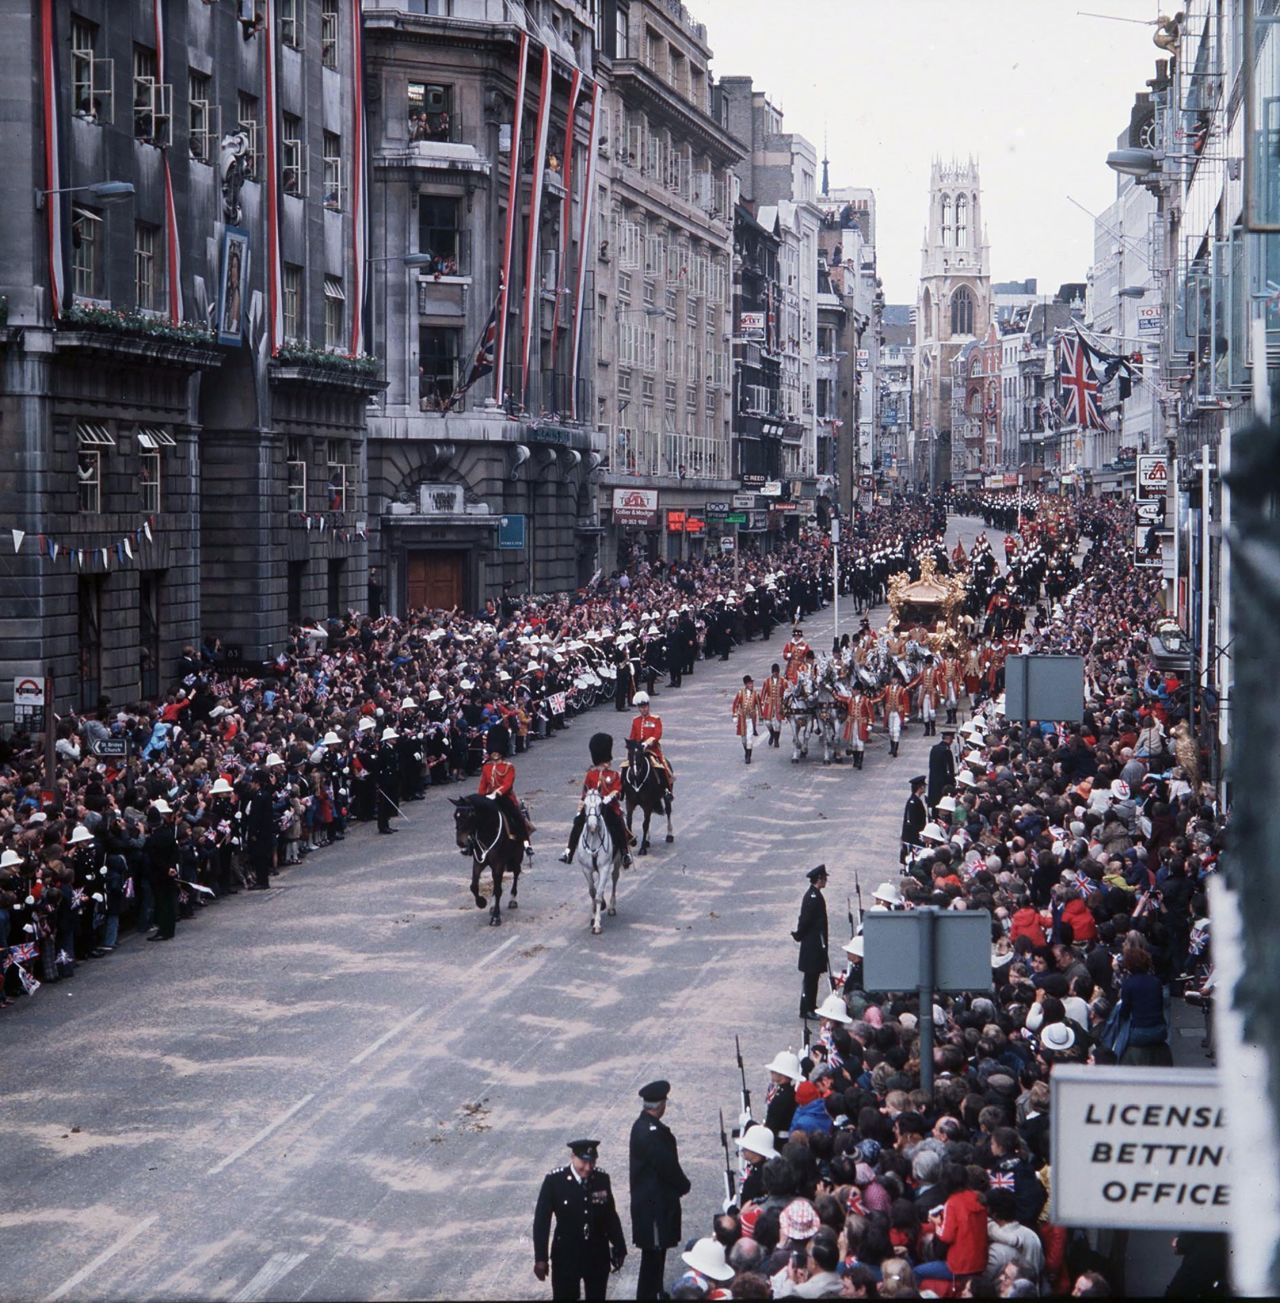 Huge crowds line the streets of London to see the royal procession during the Silver Jubilee celebrations on June 7, 1977.